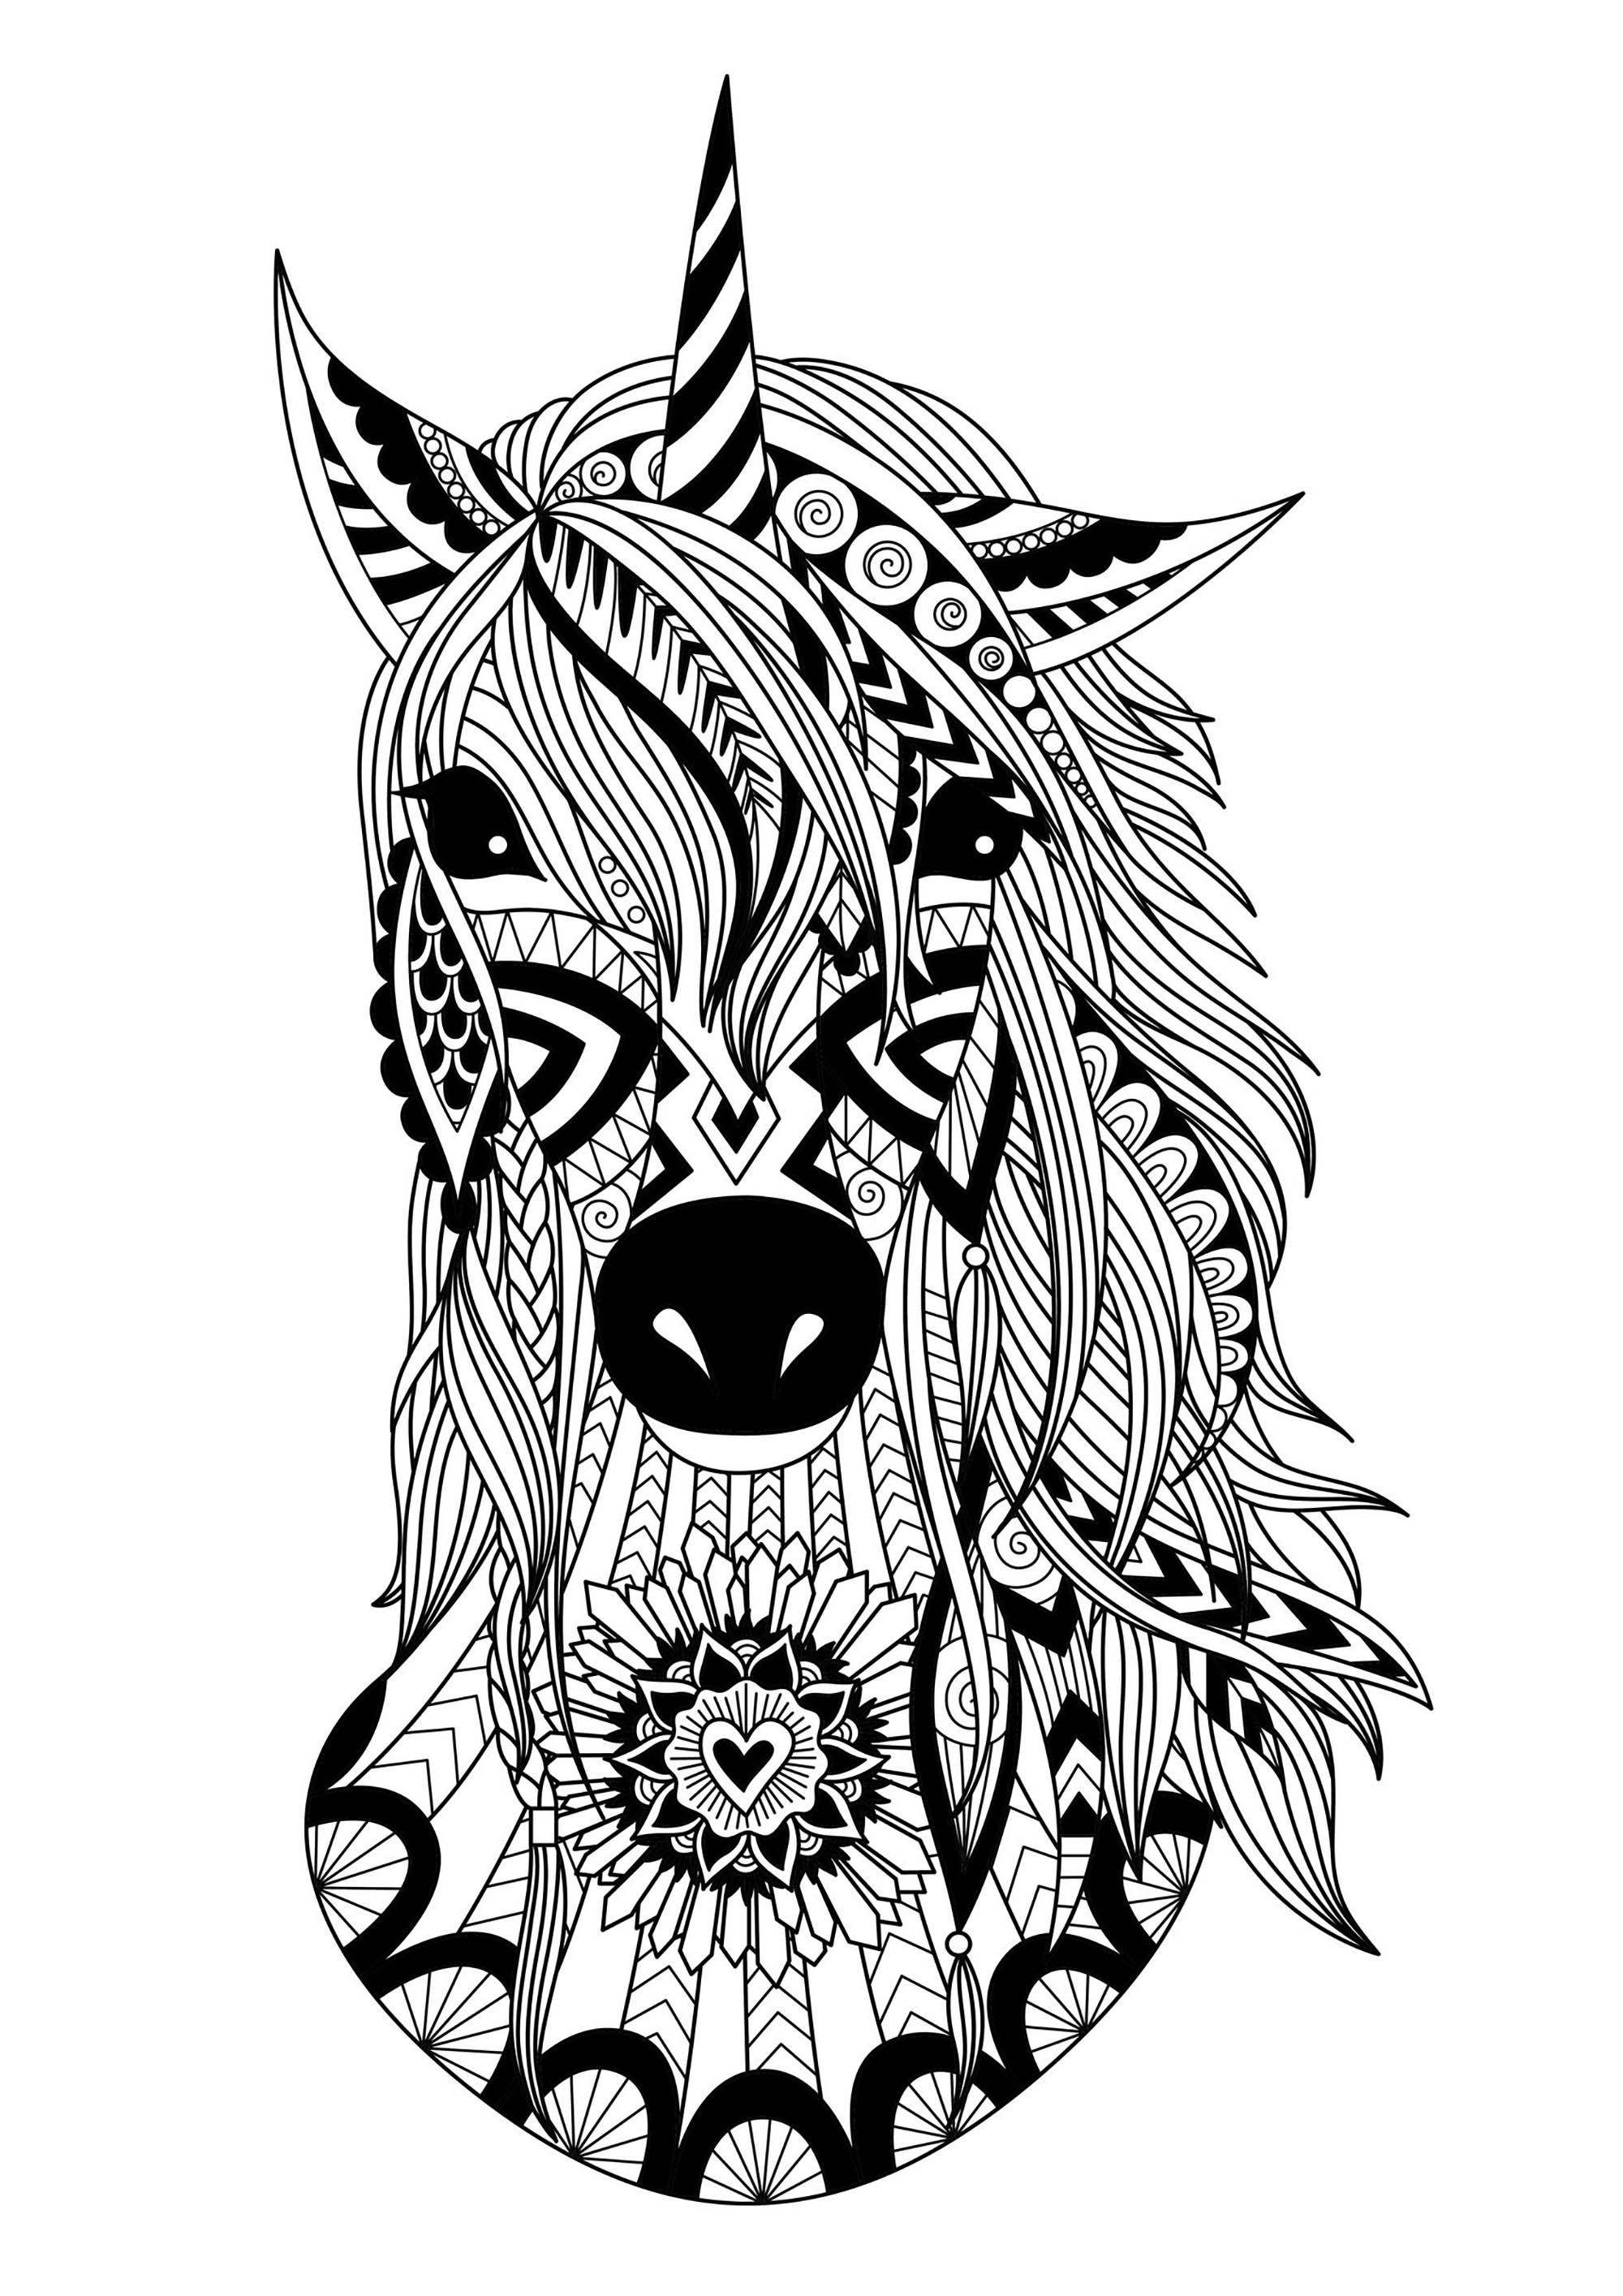 Download Unicorns to print for free - Unicorns Kids Coloring Pages